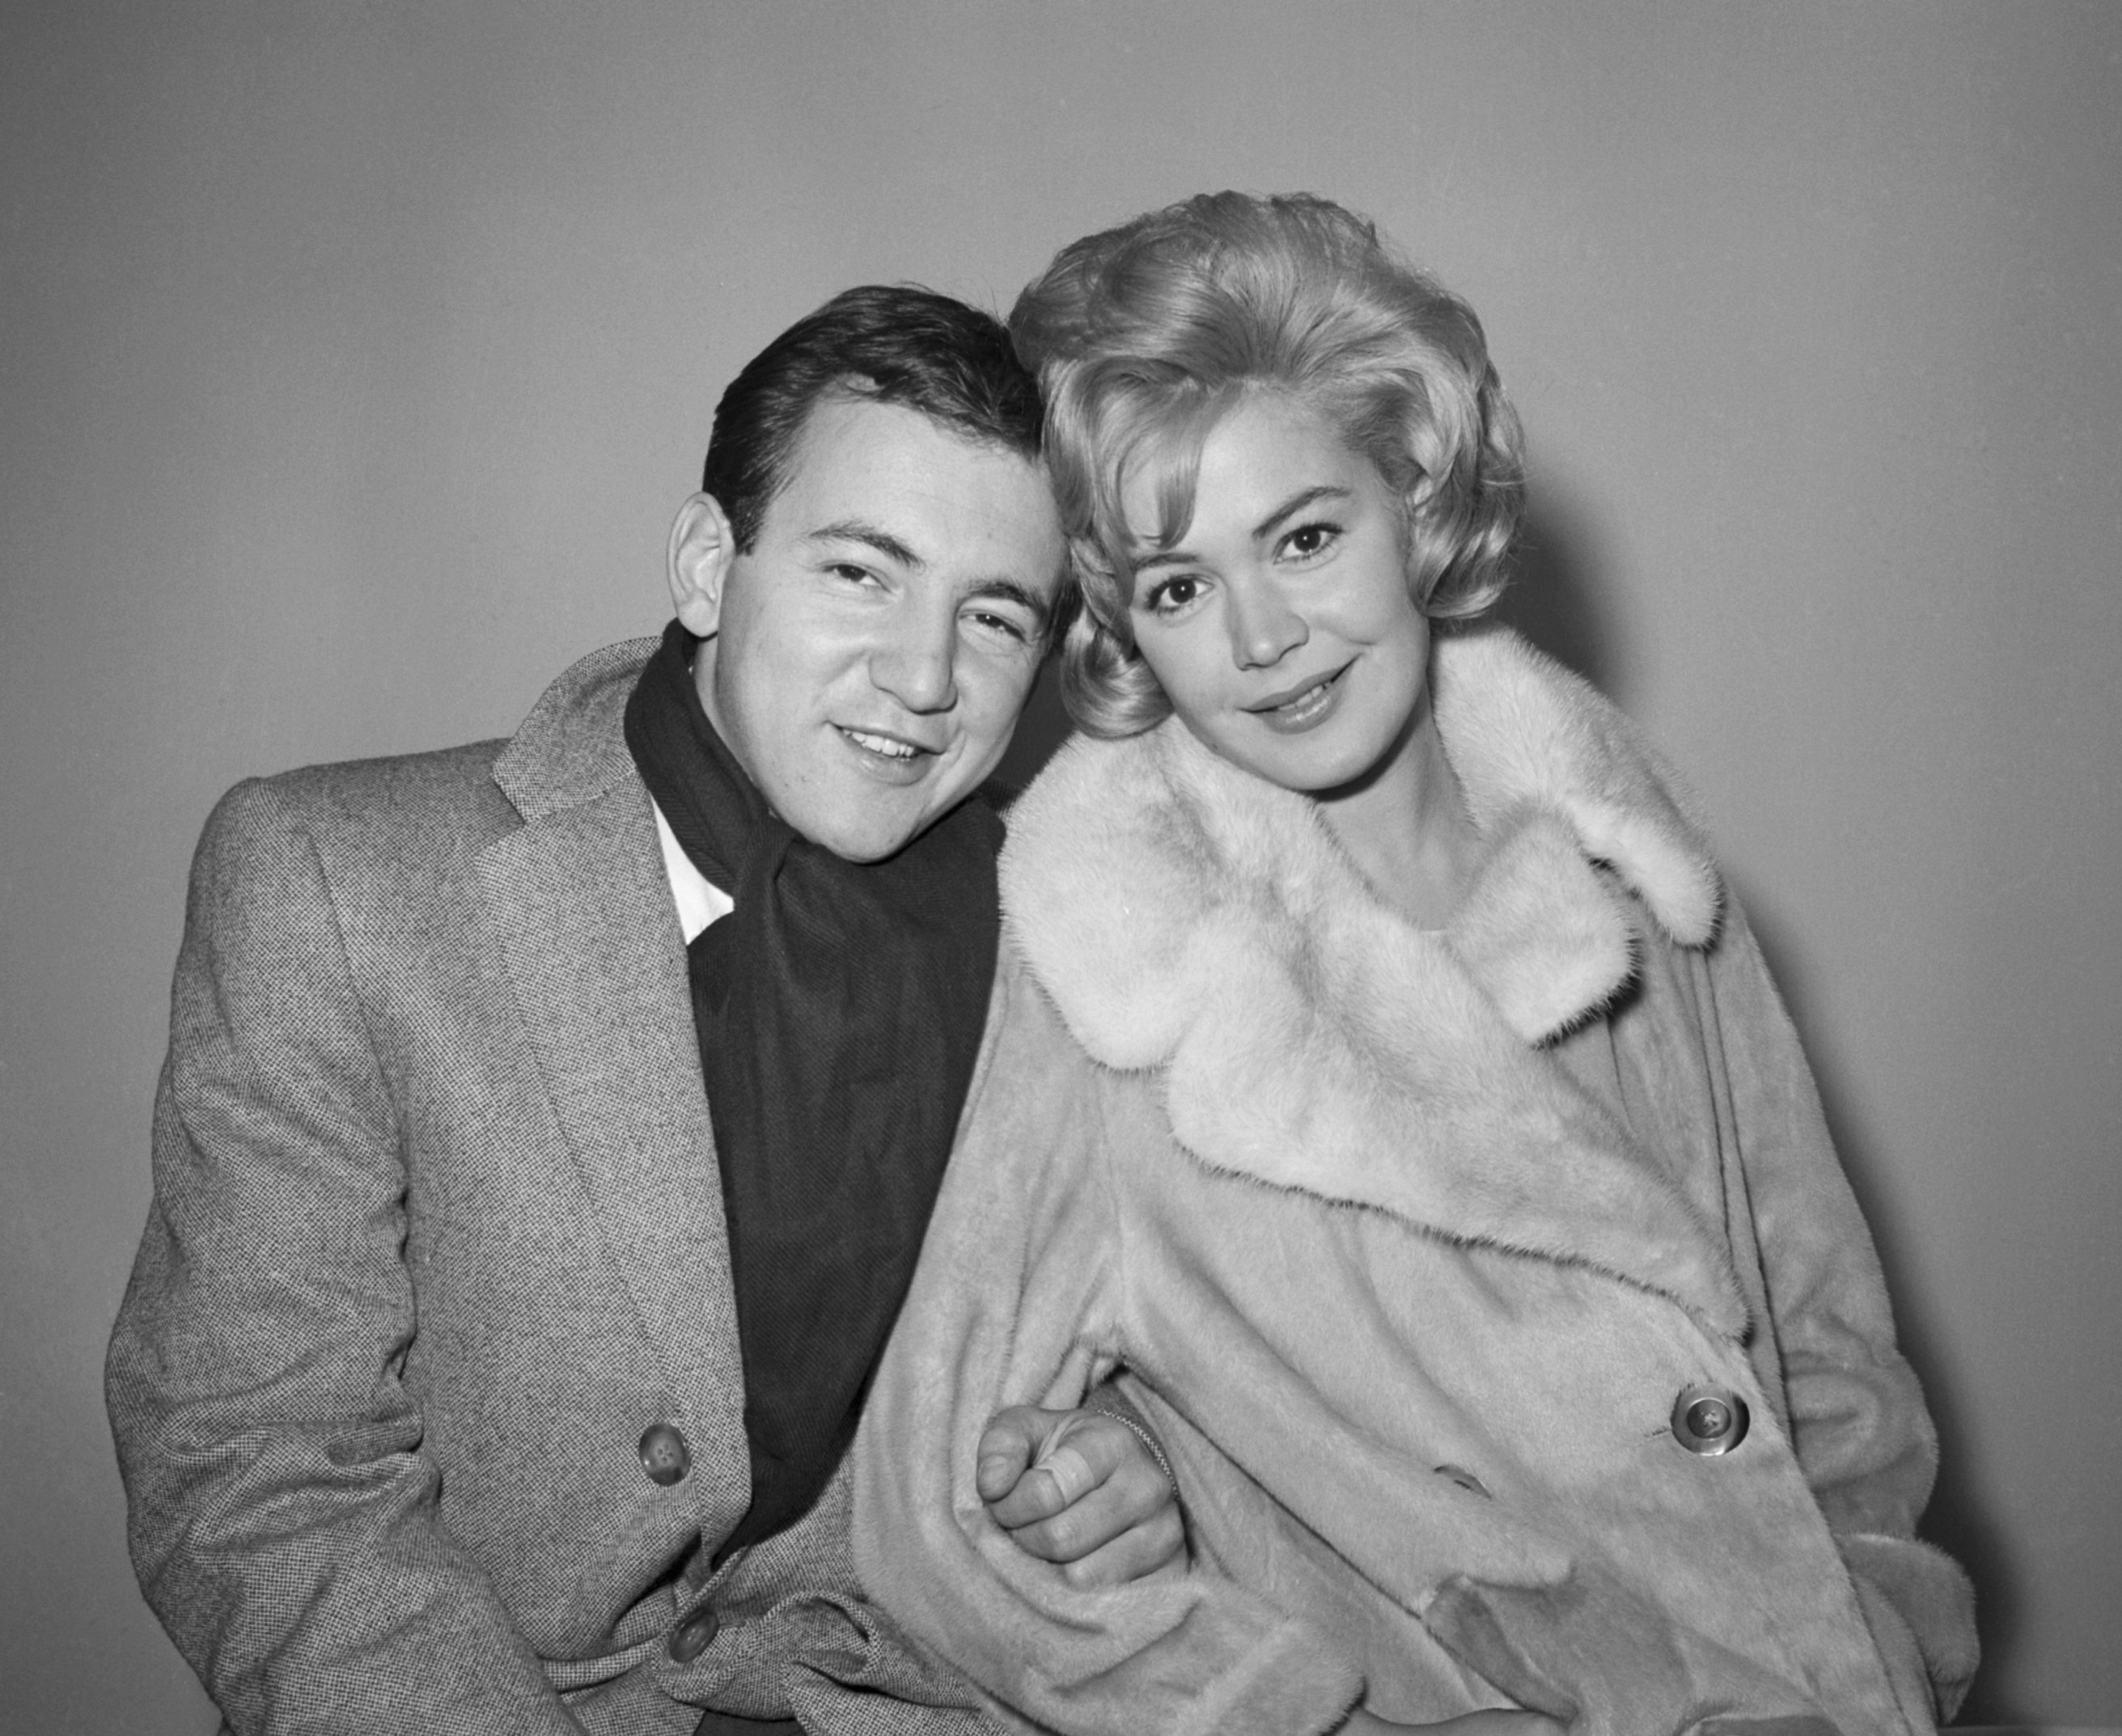  Singer Bobby Darin, 24, and actress Sandra Dee, 19, pose at Idlewild Airport, after their secret marriage earlier in Elizabeth, New Jersey. on 01 Dec,1960 | Source: Getty Images 